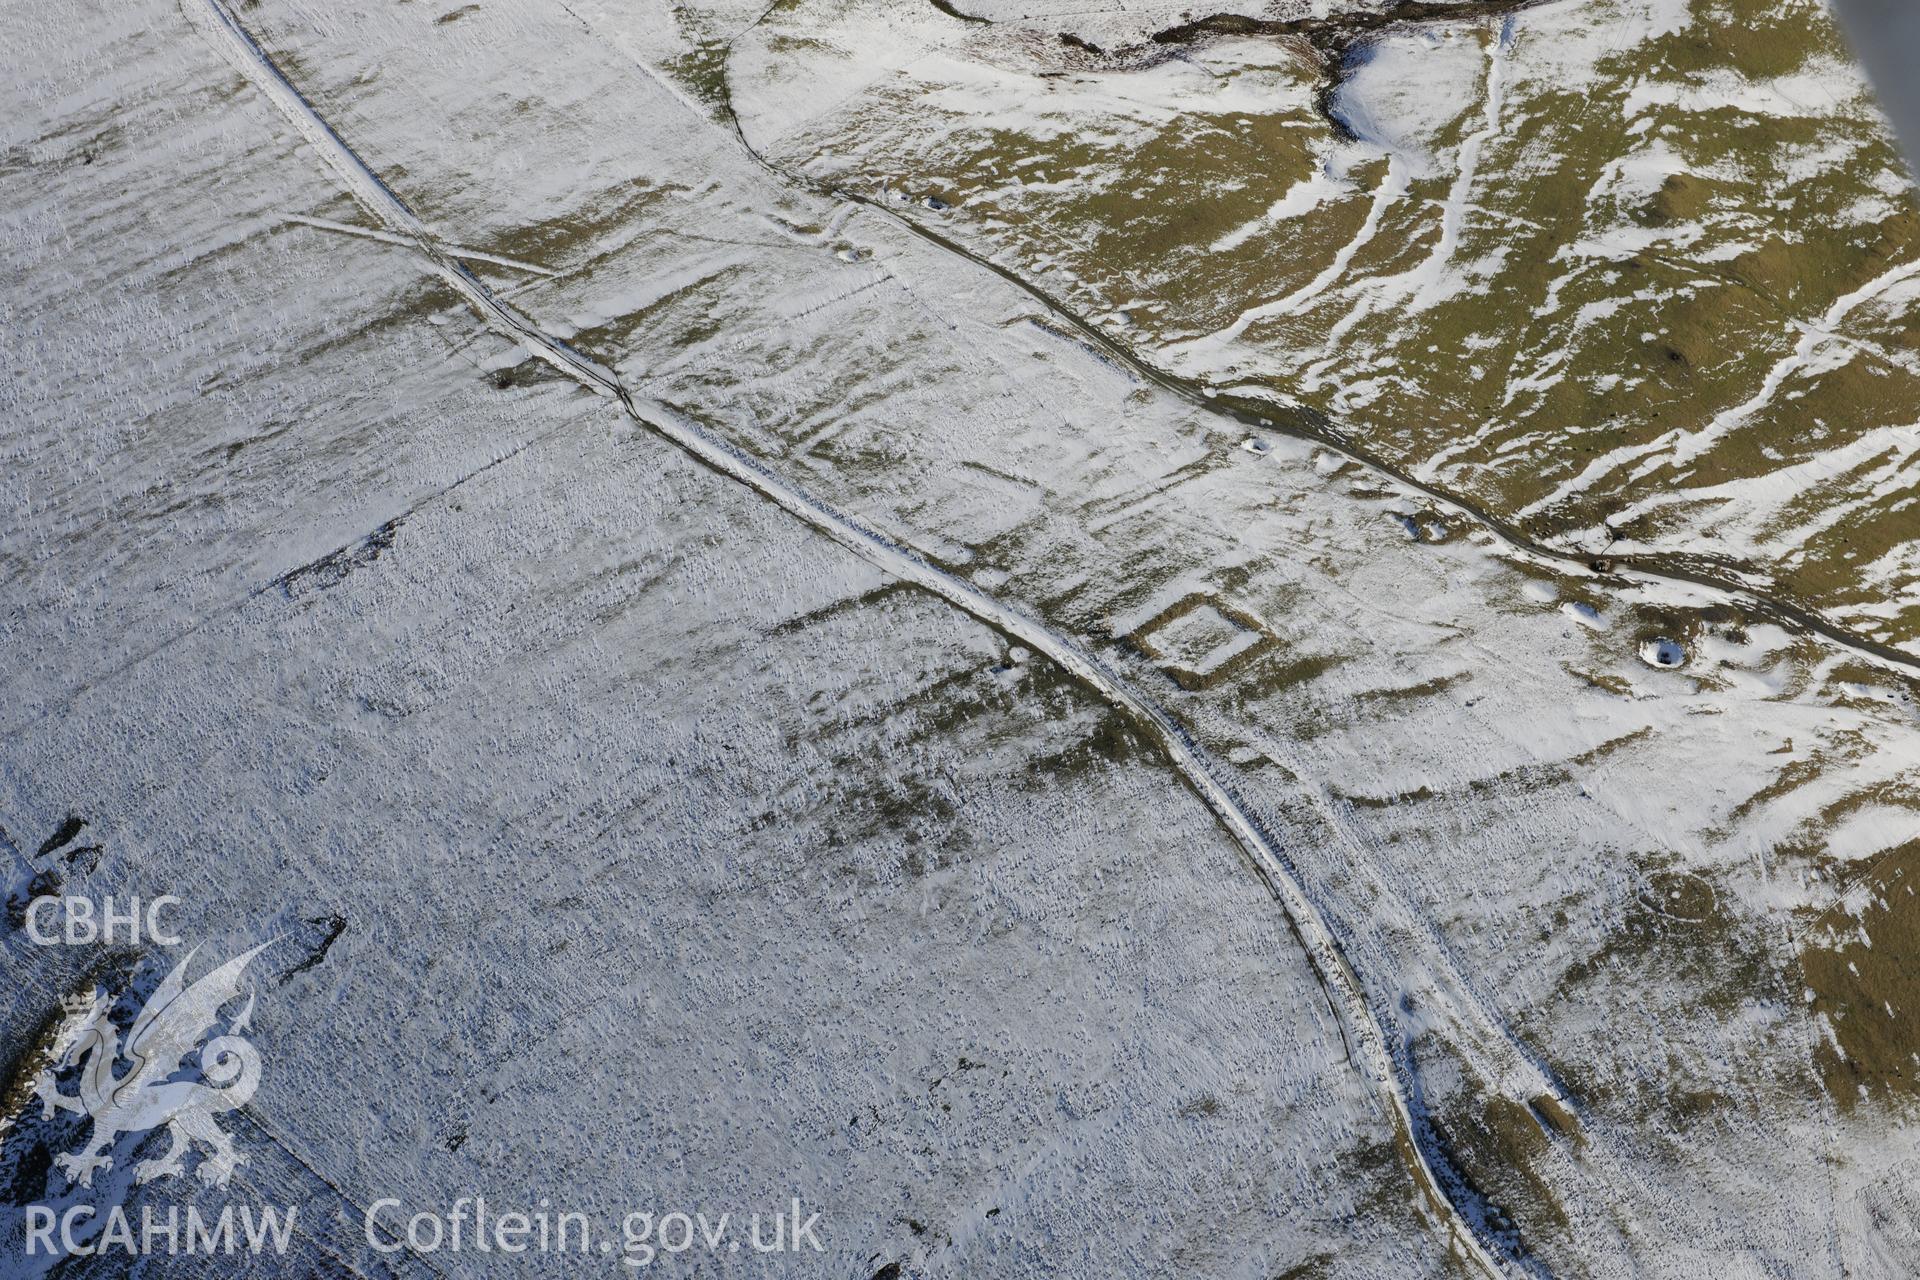 Pen y Crocbren Roman military settlement and gibbet mound, south west of Dylife, Machynlleth. Oblique aerial photograph taken during the Royal Commission's programme of archaeological aerial reconnaissance by Toby Driver on 4th February 2015.